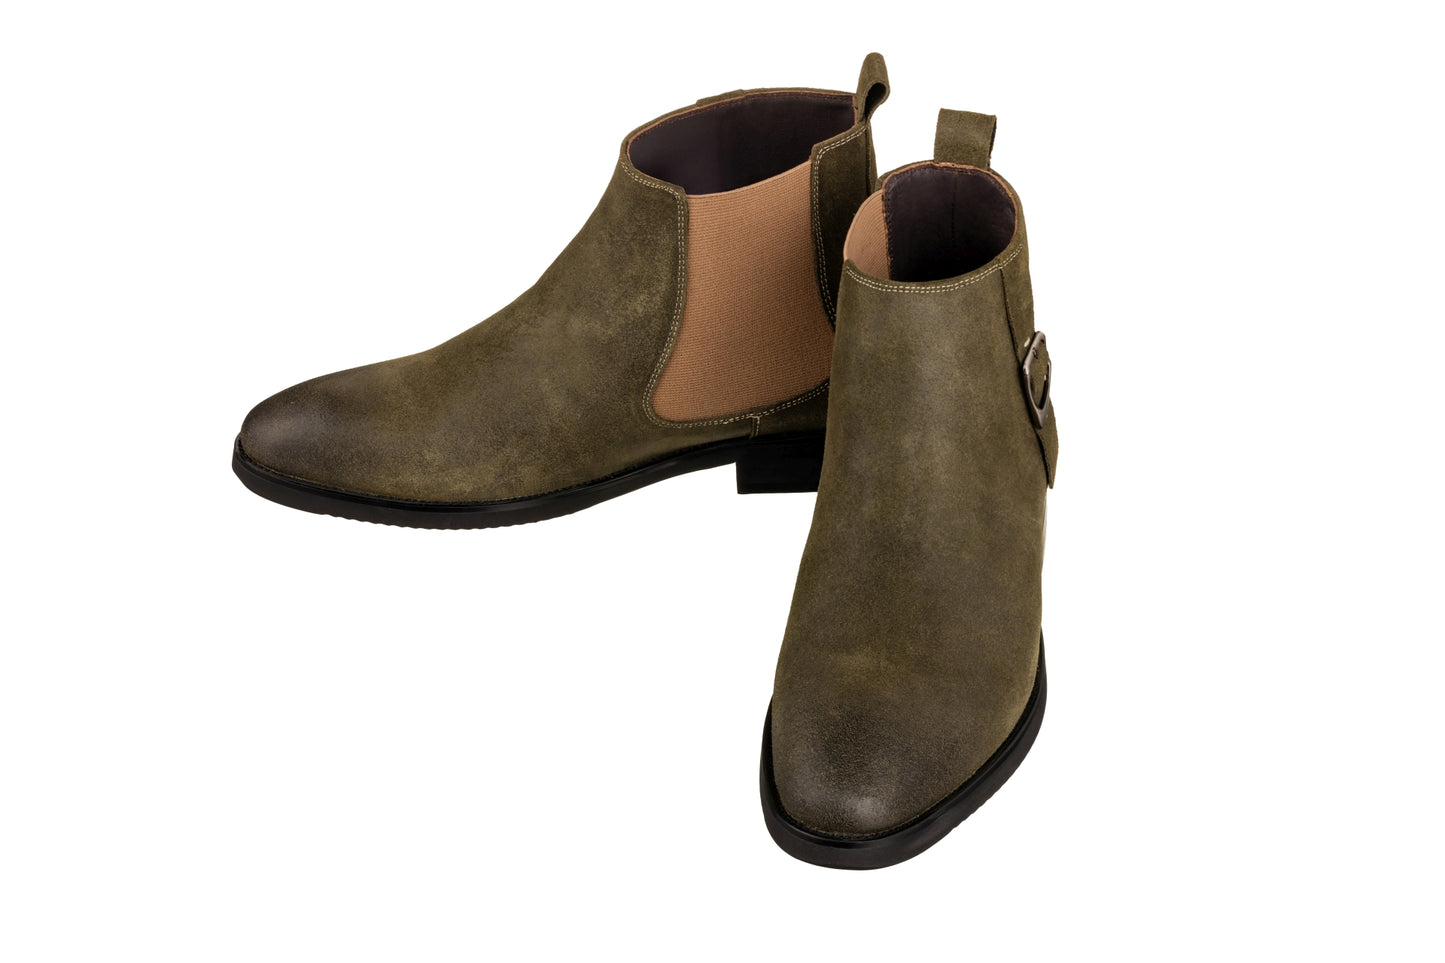 Elevator shoes height increase TOTO - K92082 - 3.0 Inches Taller (Nubuck Army Green) - Chelsea Ankle Boots